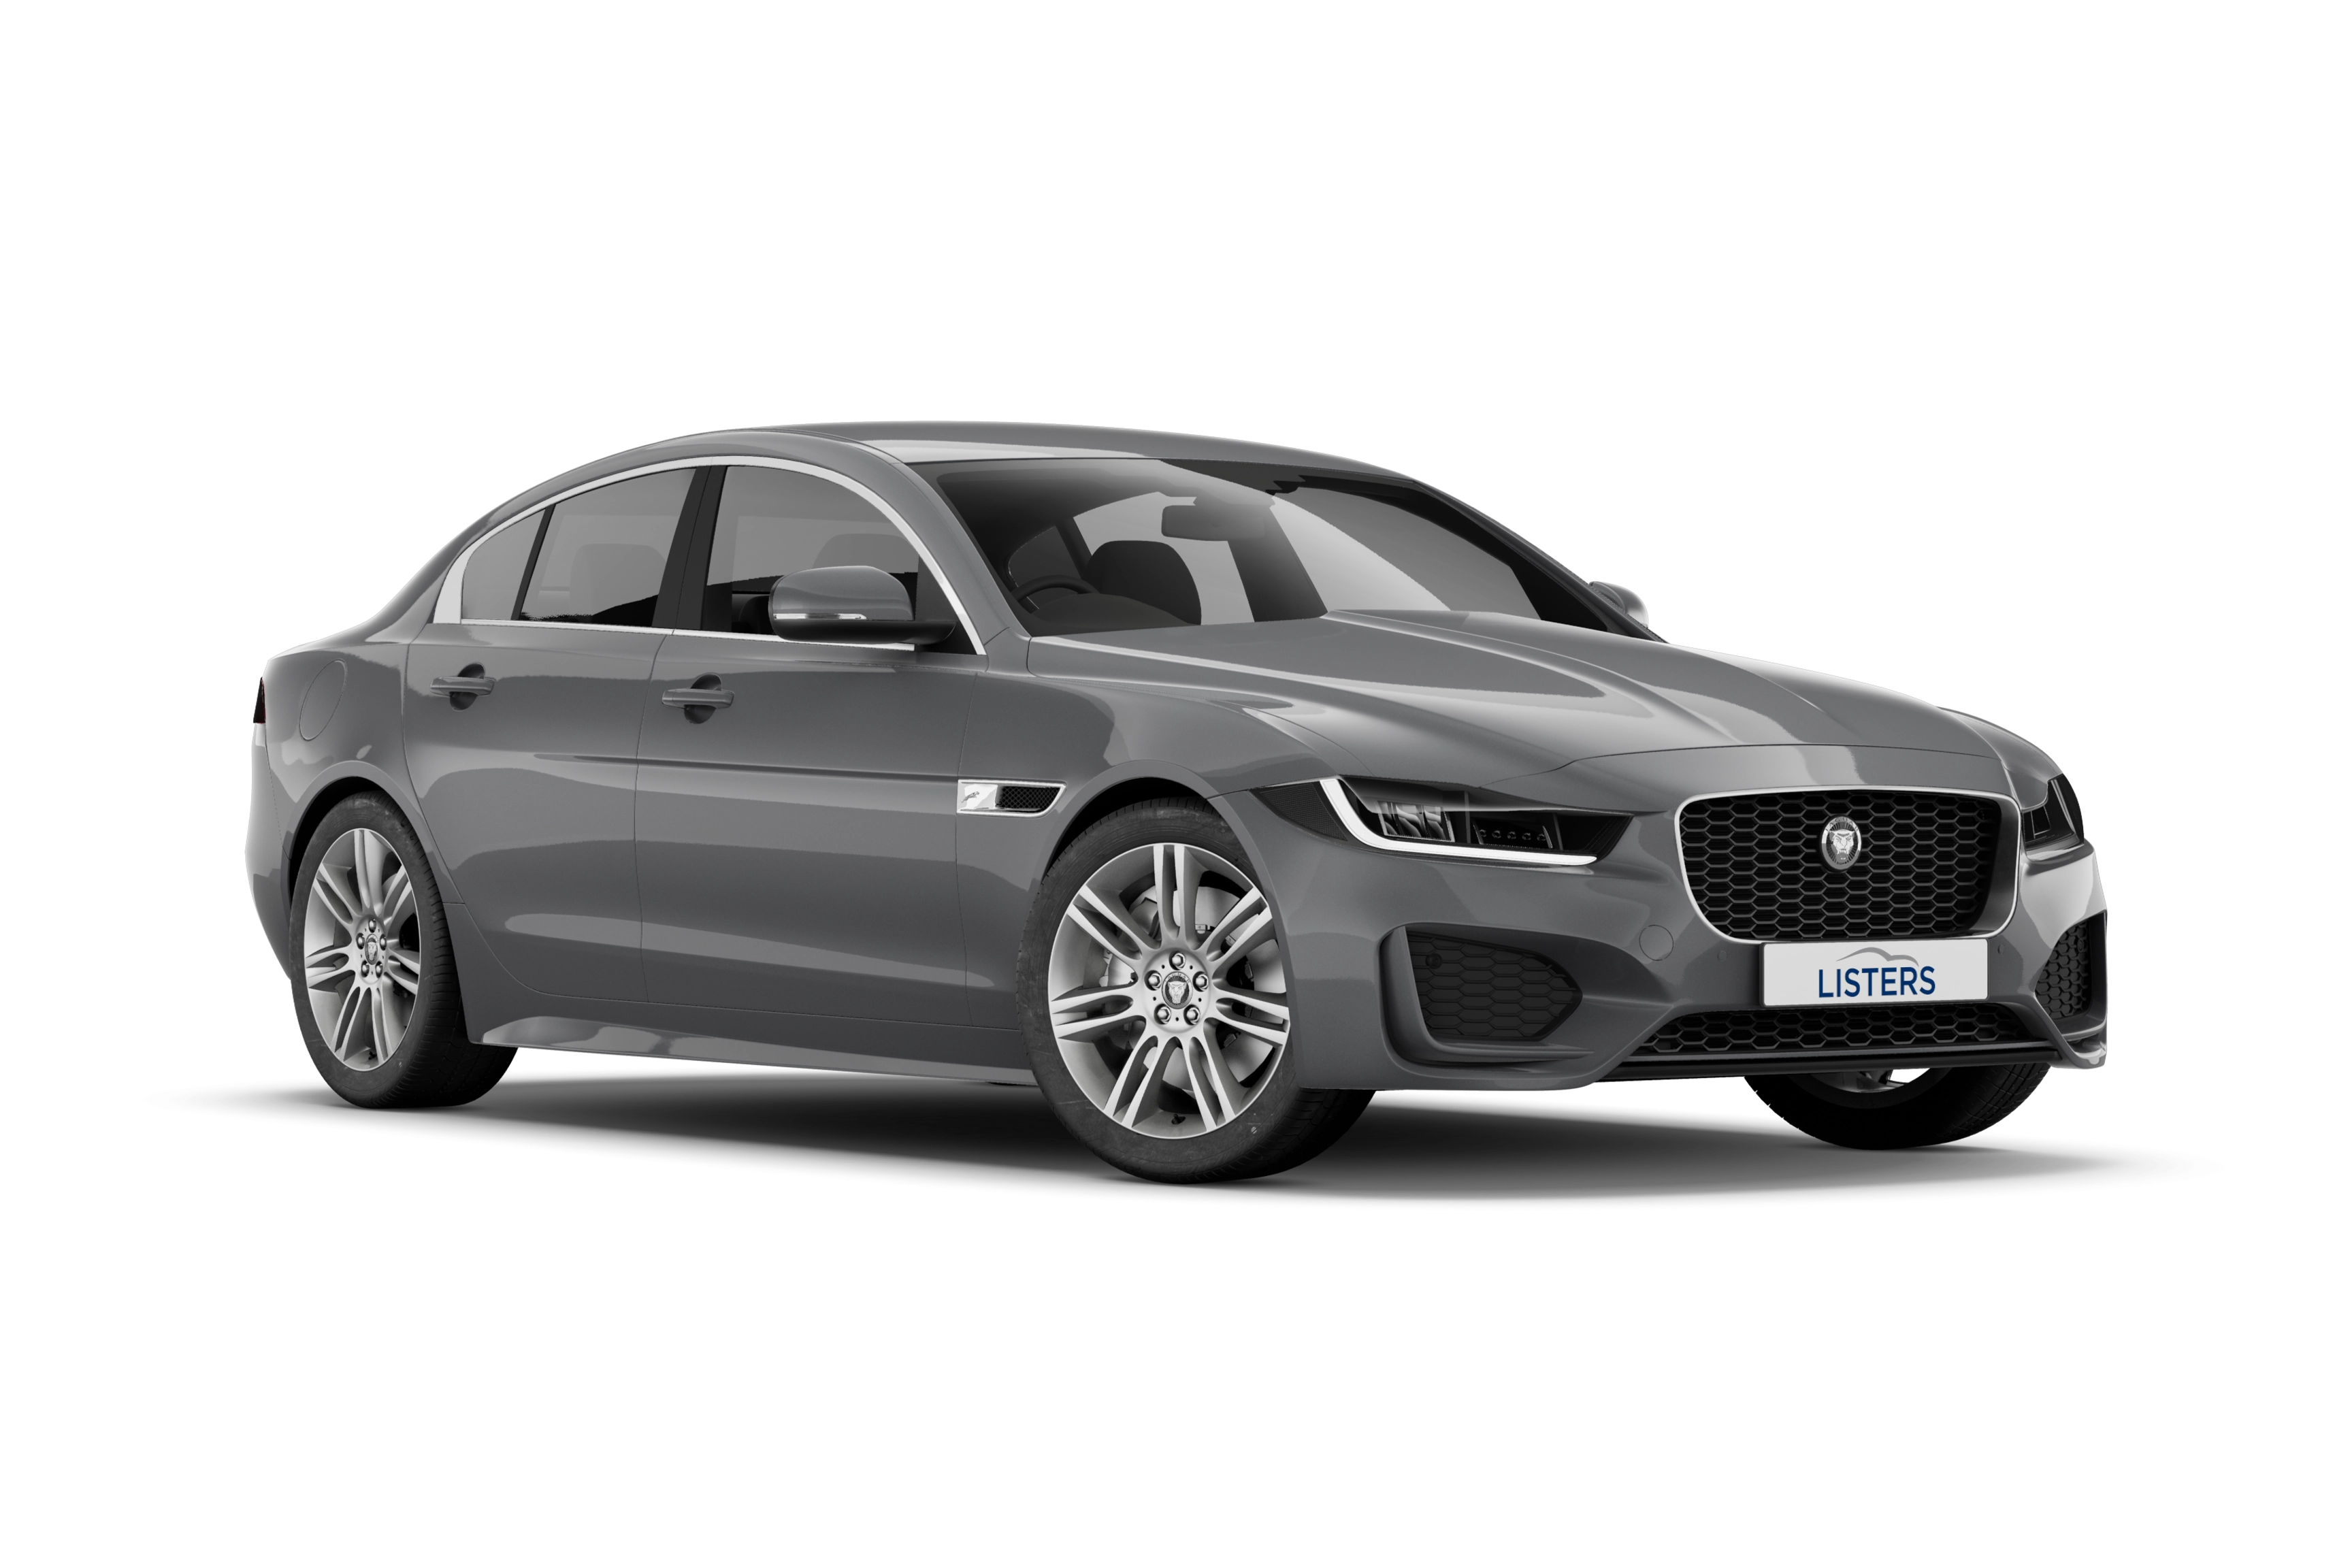 Jaguar XE Contract Hire & Leasing Offers